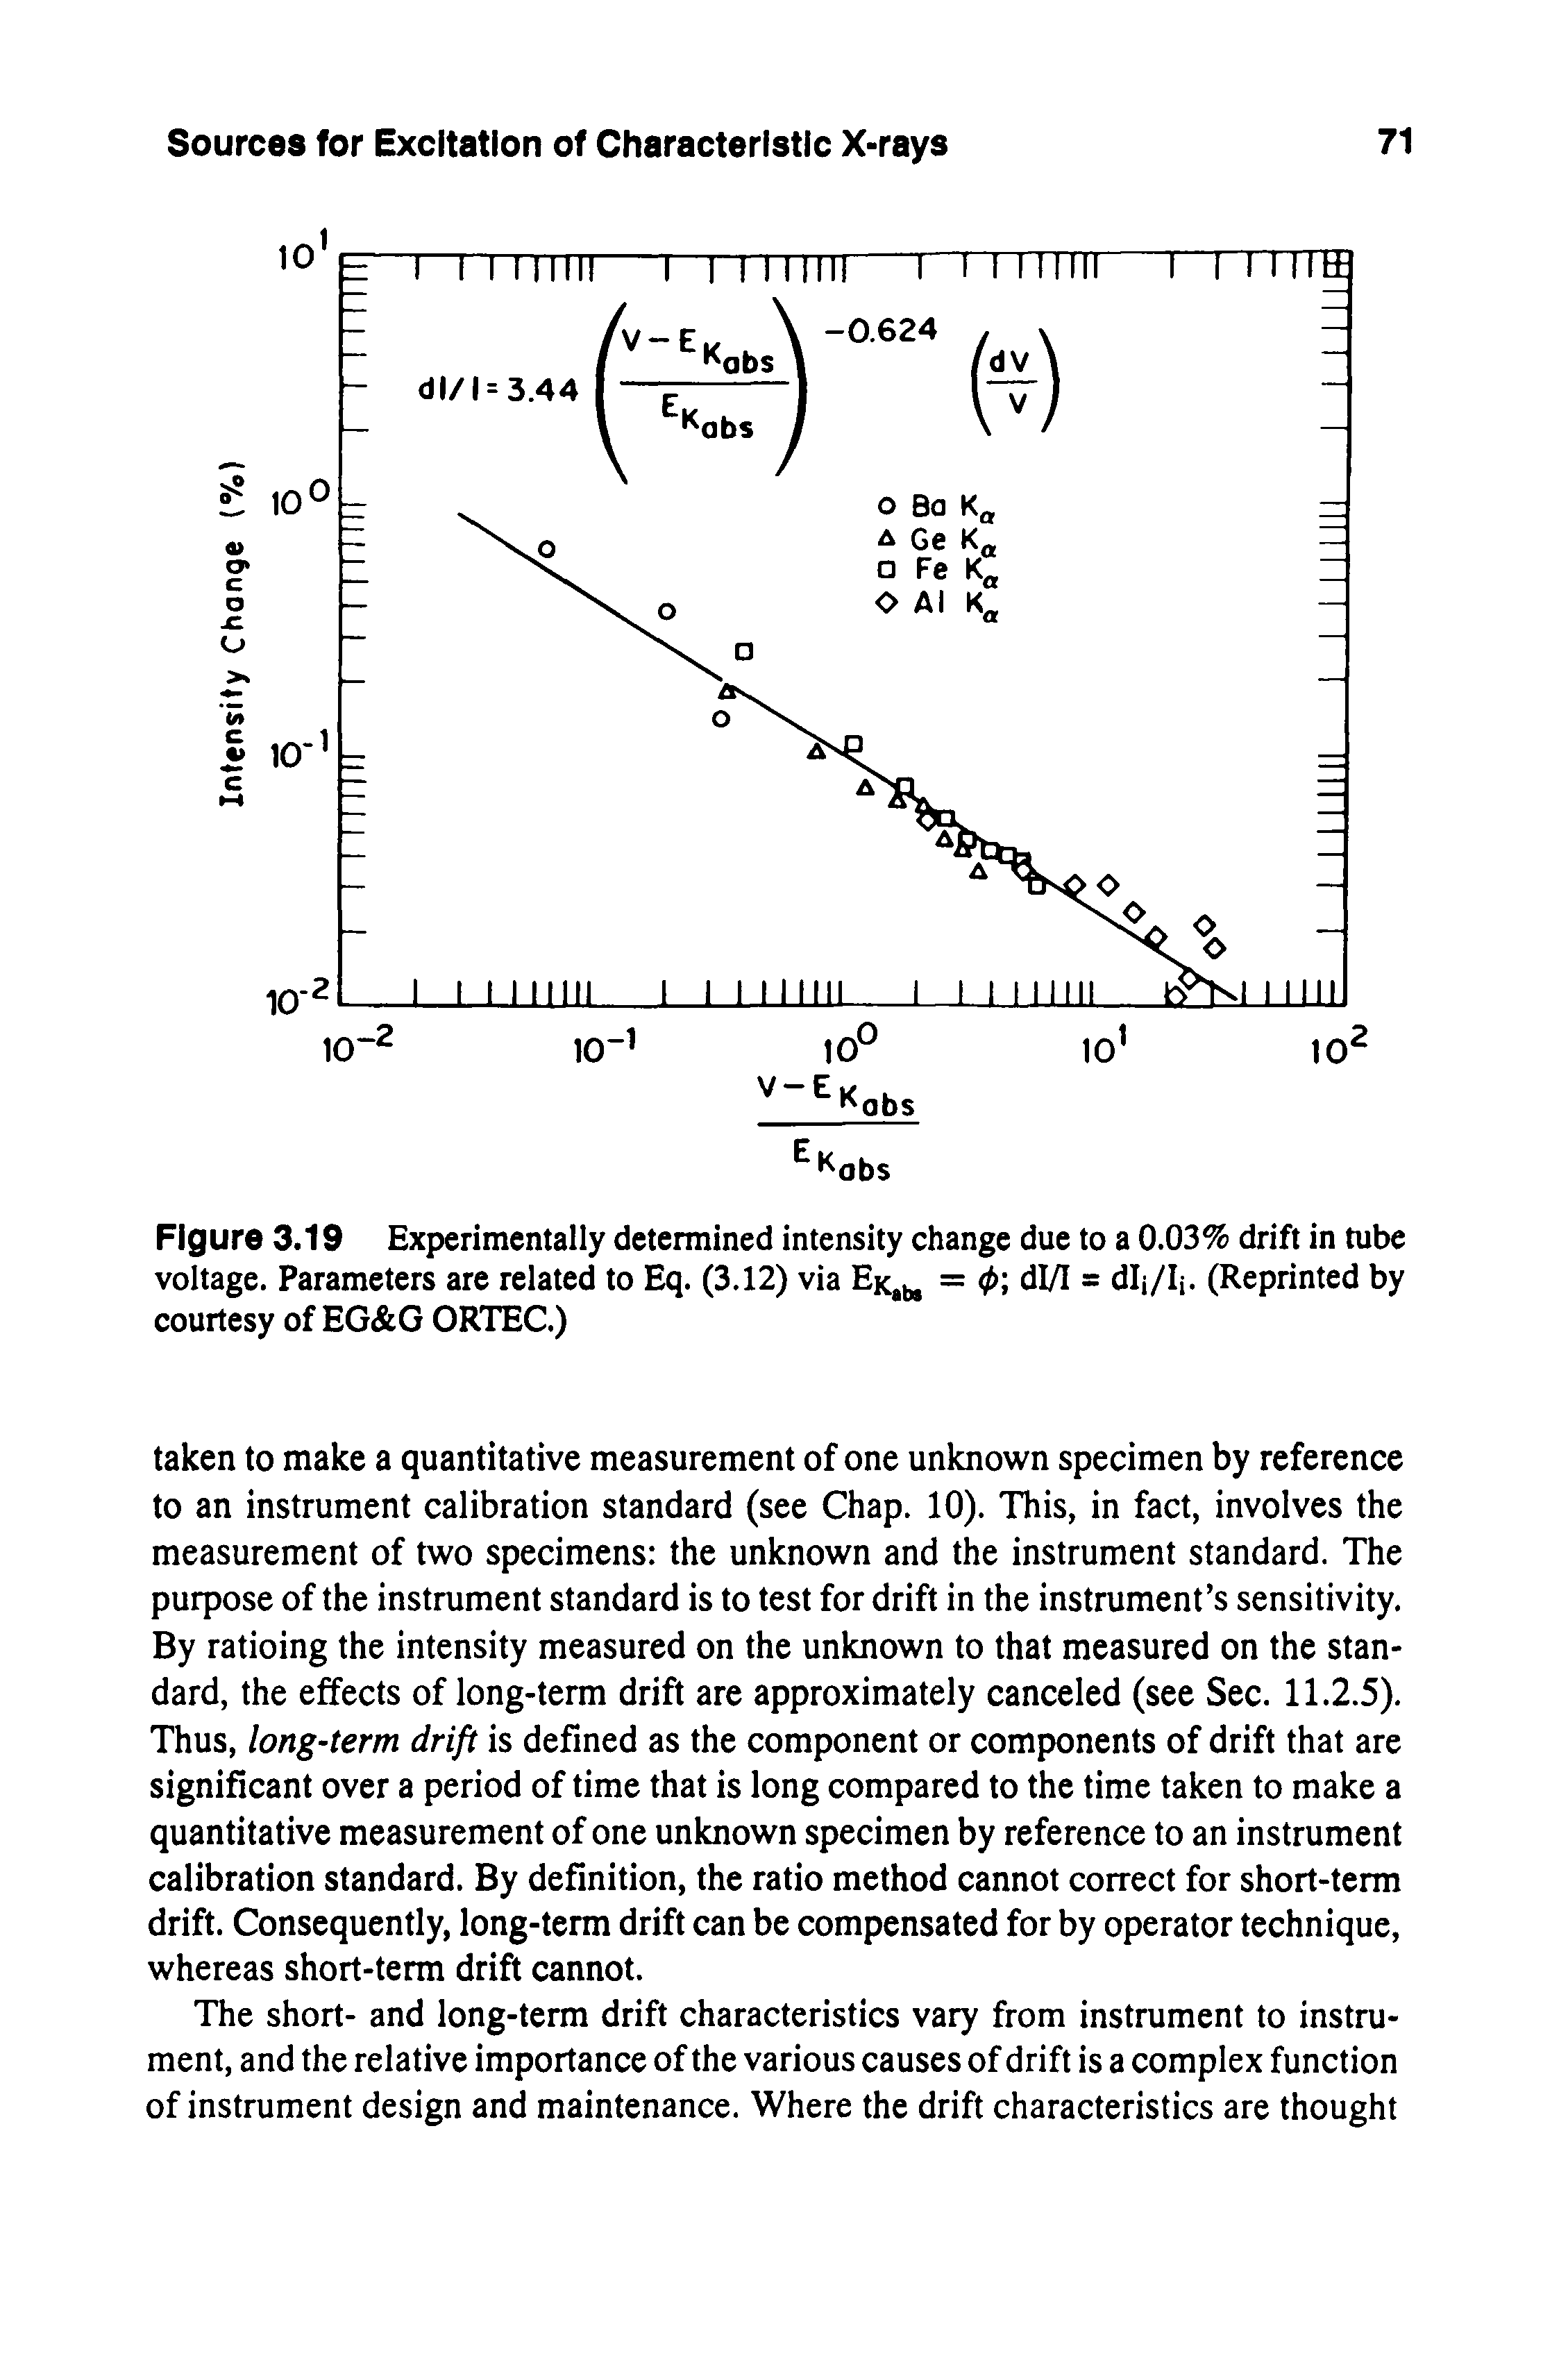 Figure 3.19 Experimentally determined intensity change due to a 0.03% drift in tube voltage. Parameters are related to Eq. (3.12) via Ek, = 0 dl/I = dlj/Ij. (Reprinted by courtesy of EG G ORTEC.)...